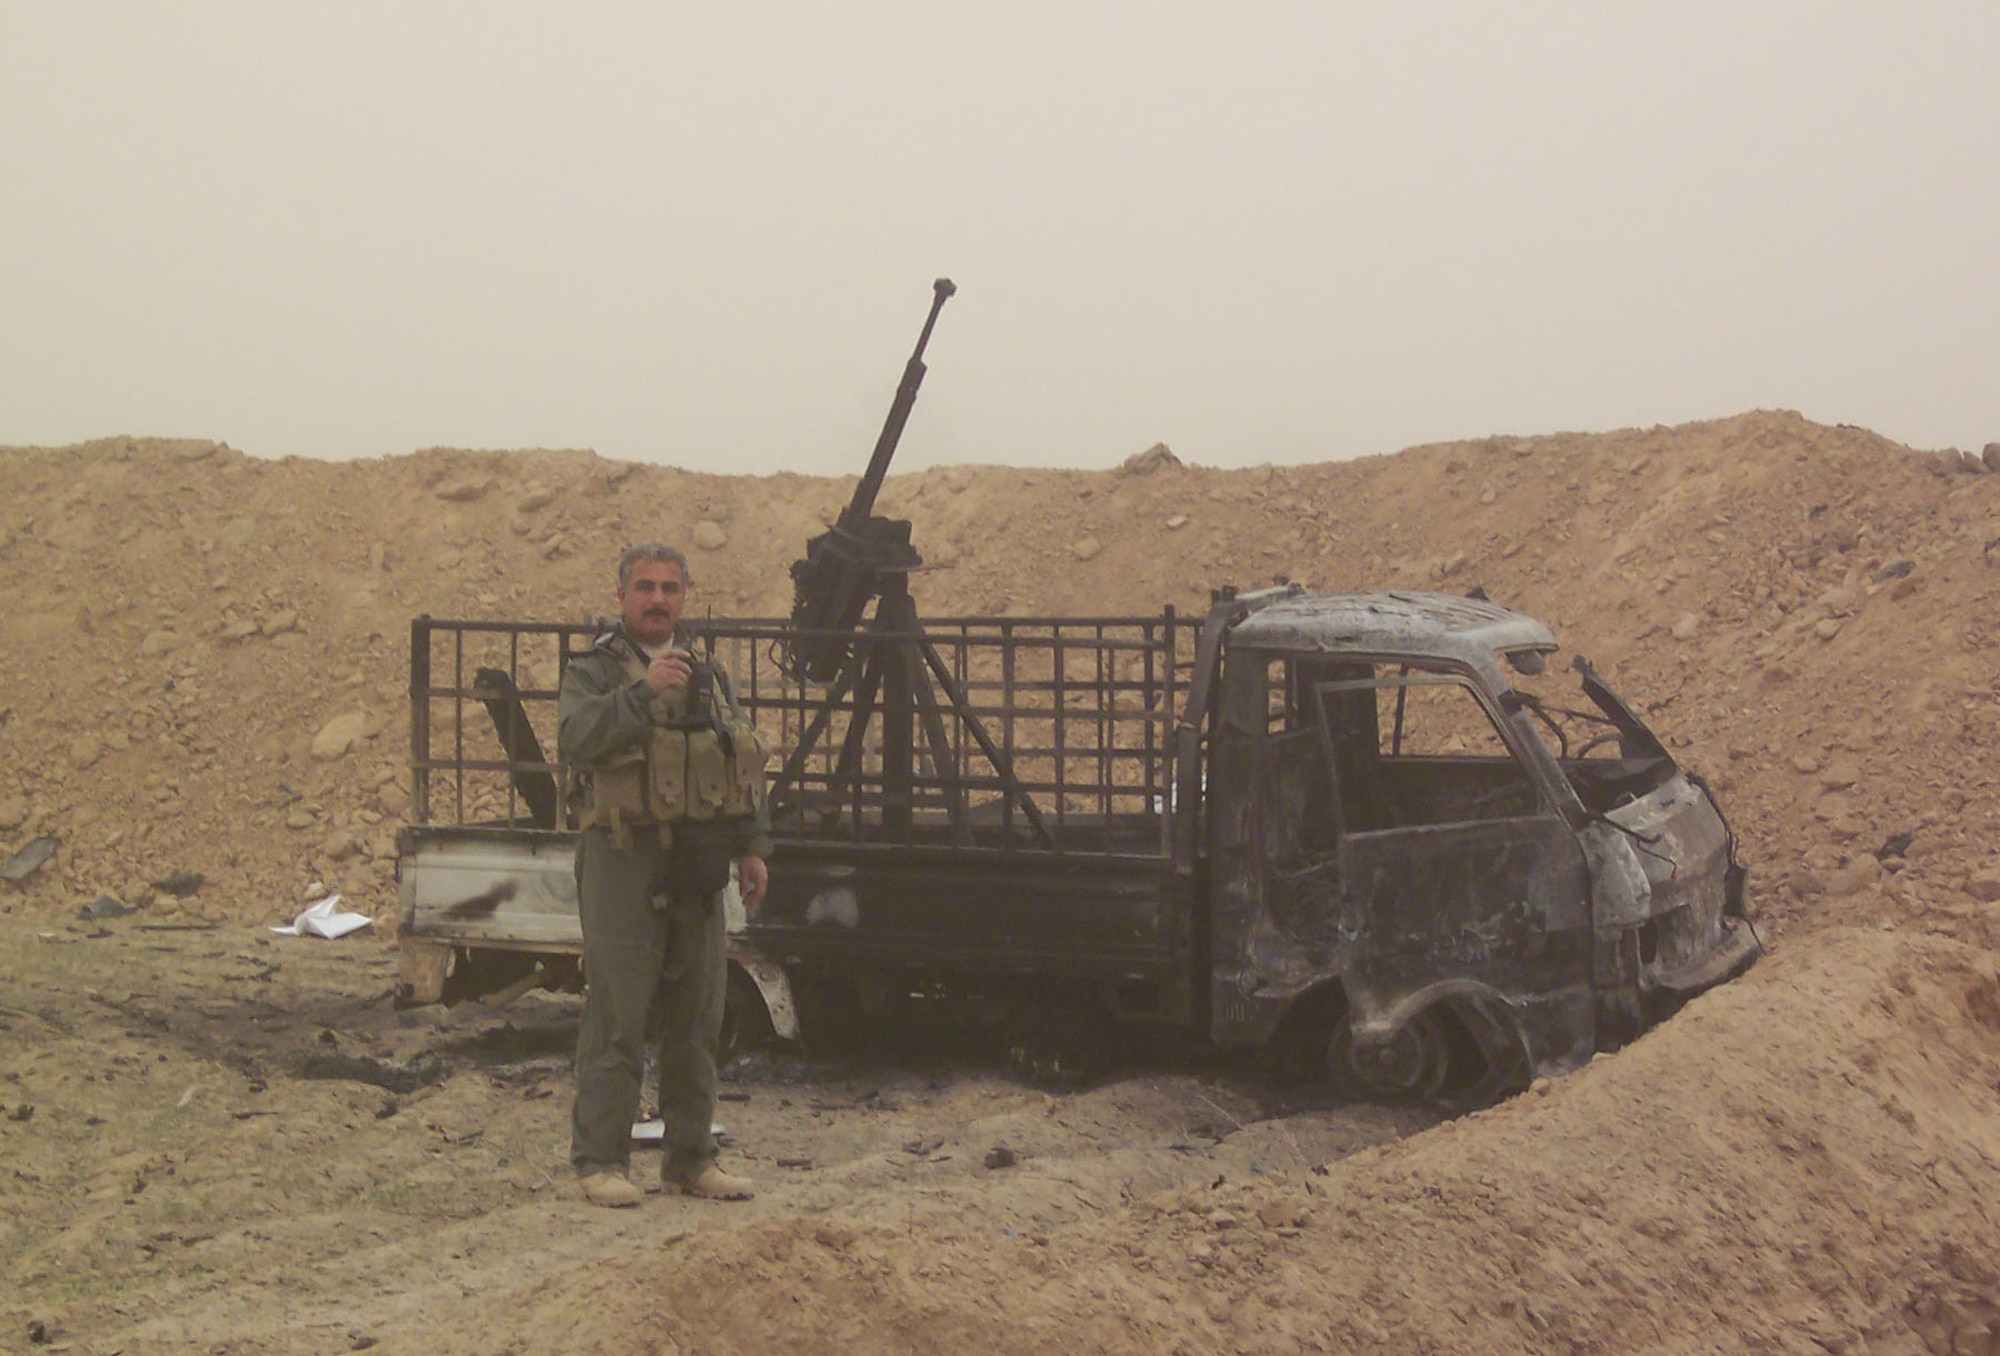 Local Iraqi SWAT commander standing next to an insurgent gun truck that was destroyed after the GBU-12 500-pound hit the trench next to the truck. The insurgents had several vehicle-mounted heavy machine guns. (U.S. Air Force photo)